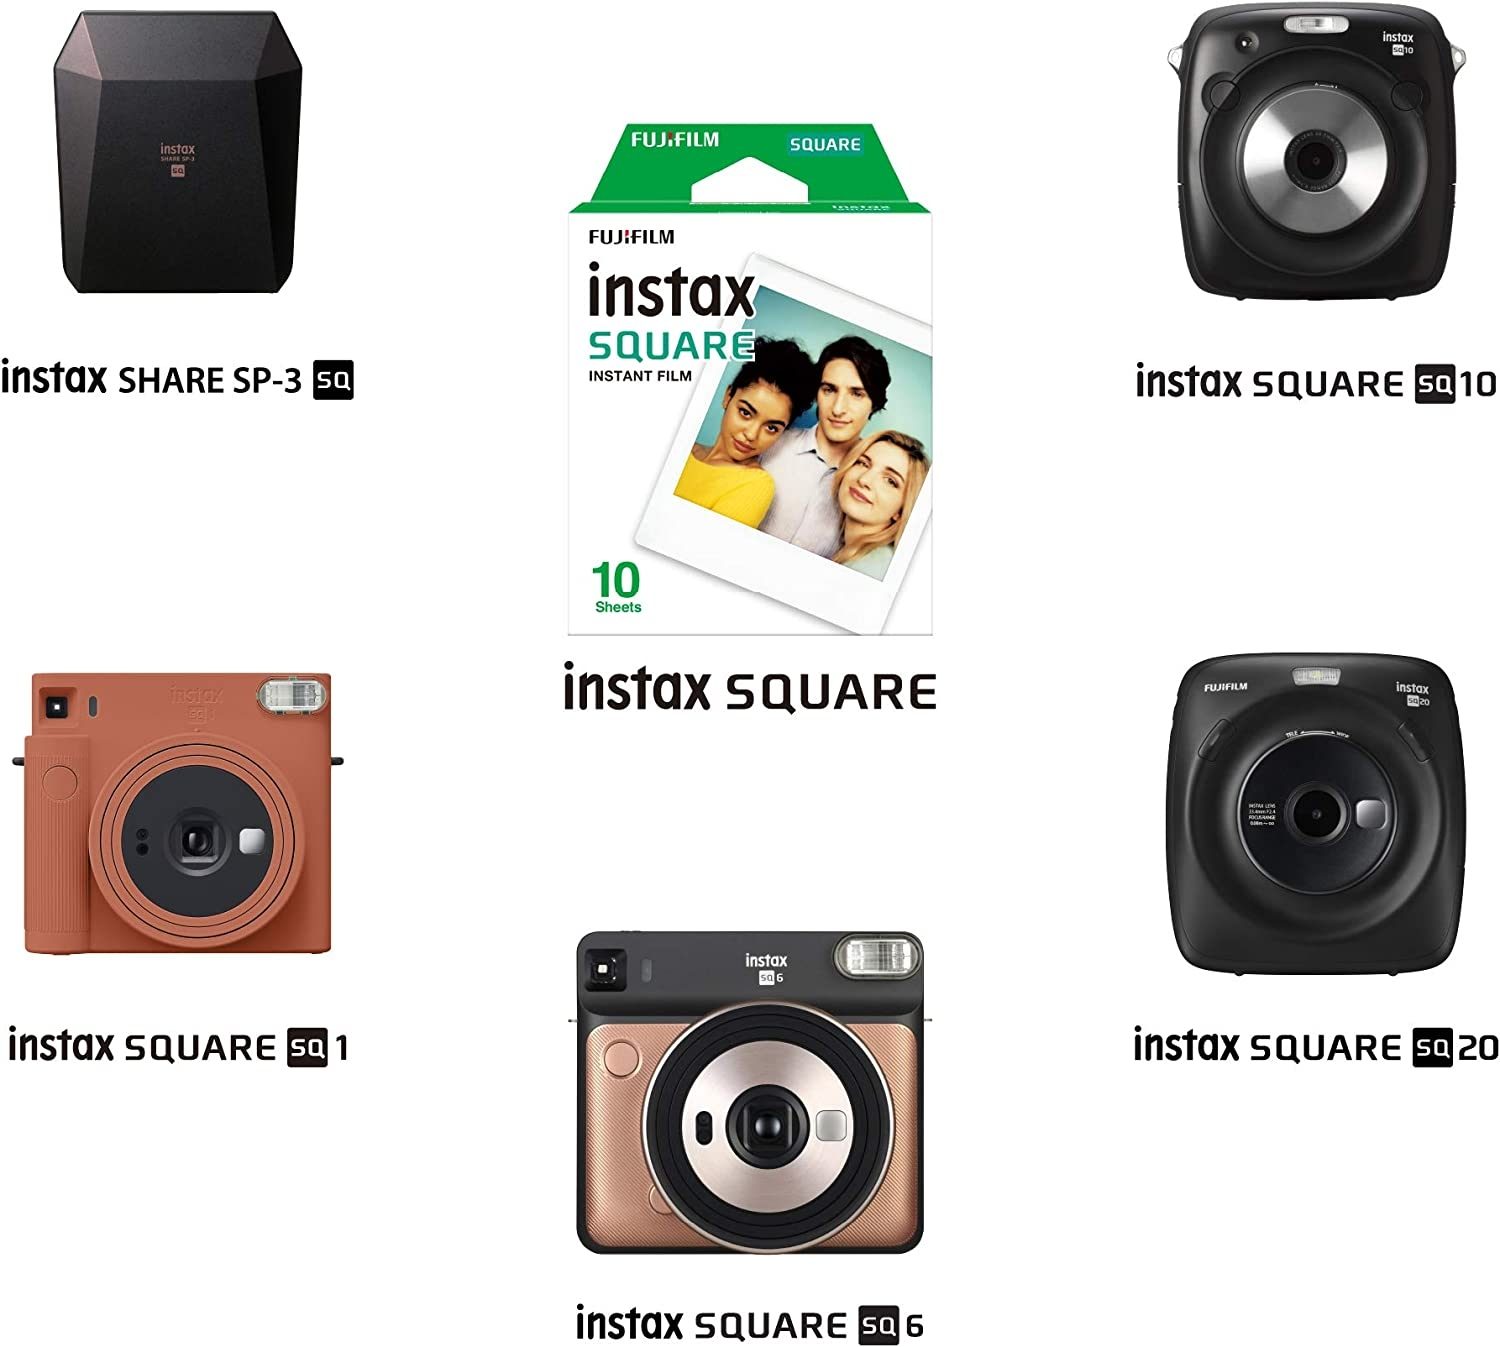 INSTAX FILM SQUARE TWIN PACK - (20 SHOTS)